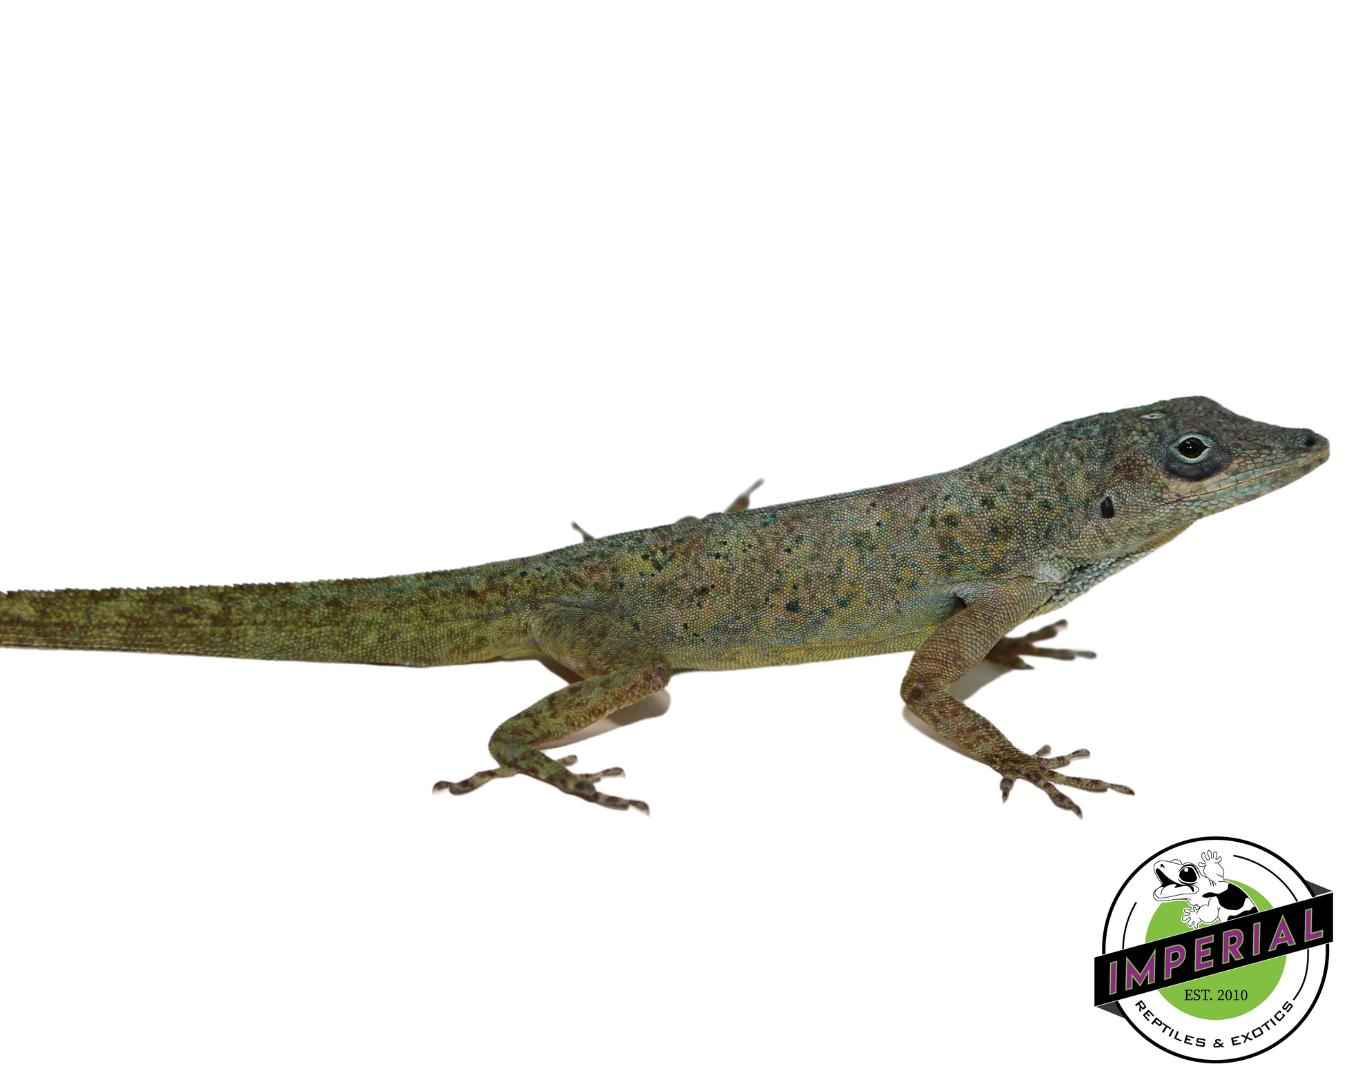 Guyana anole for sale, reptiles for sale, buy animals online